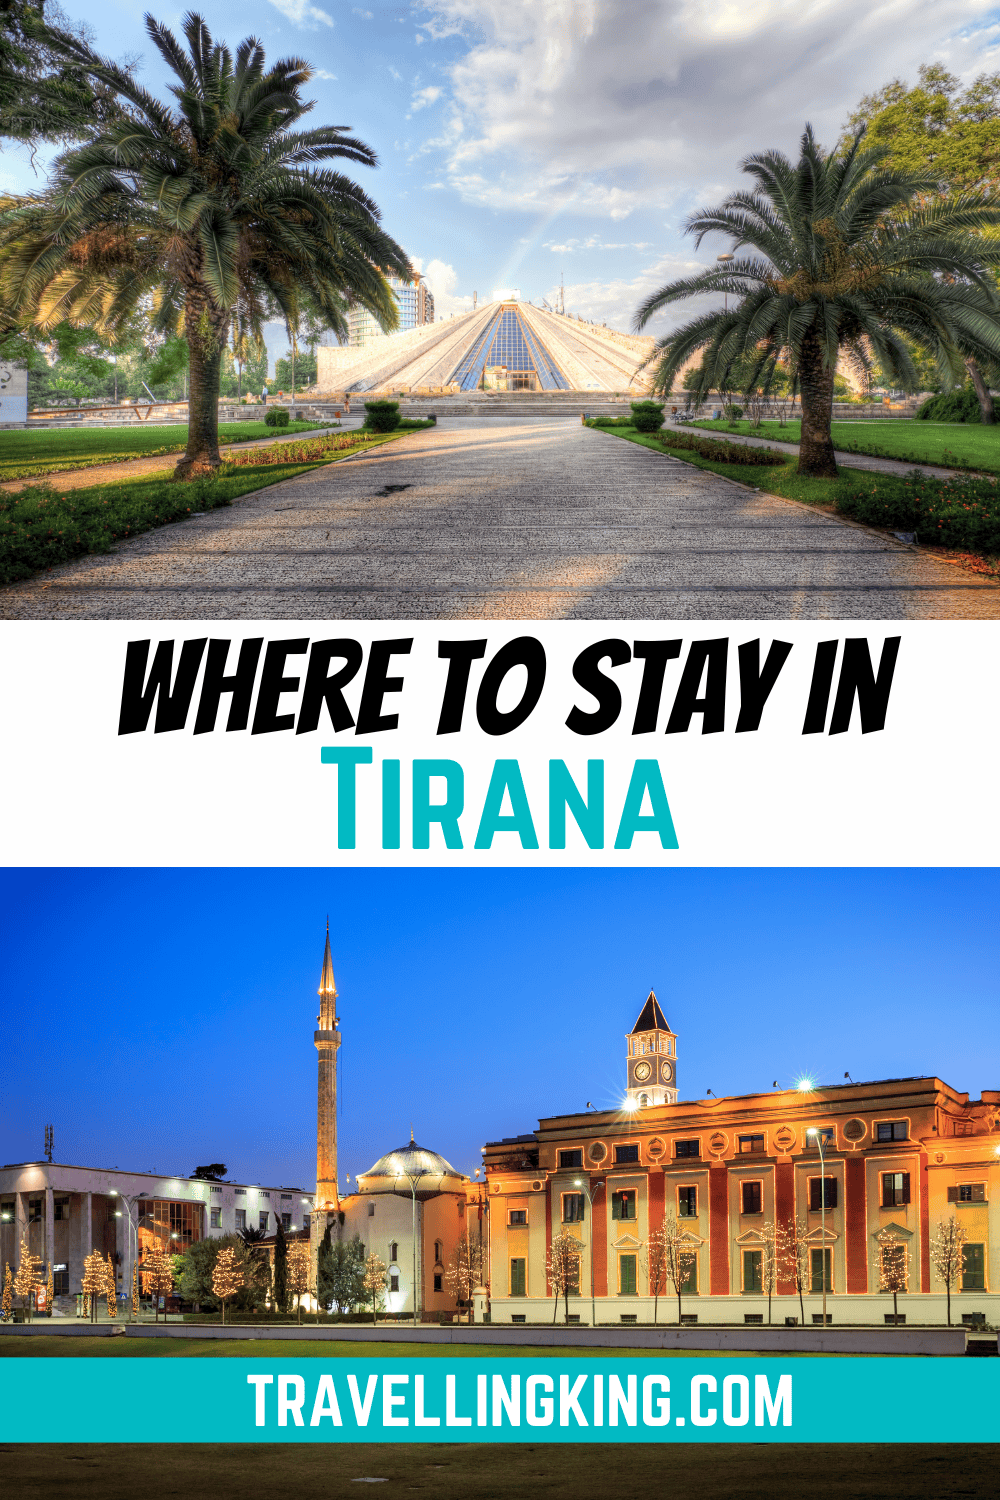 Where to stay in Tirana - Best Places to stay in Tirana